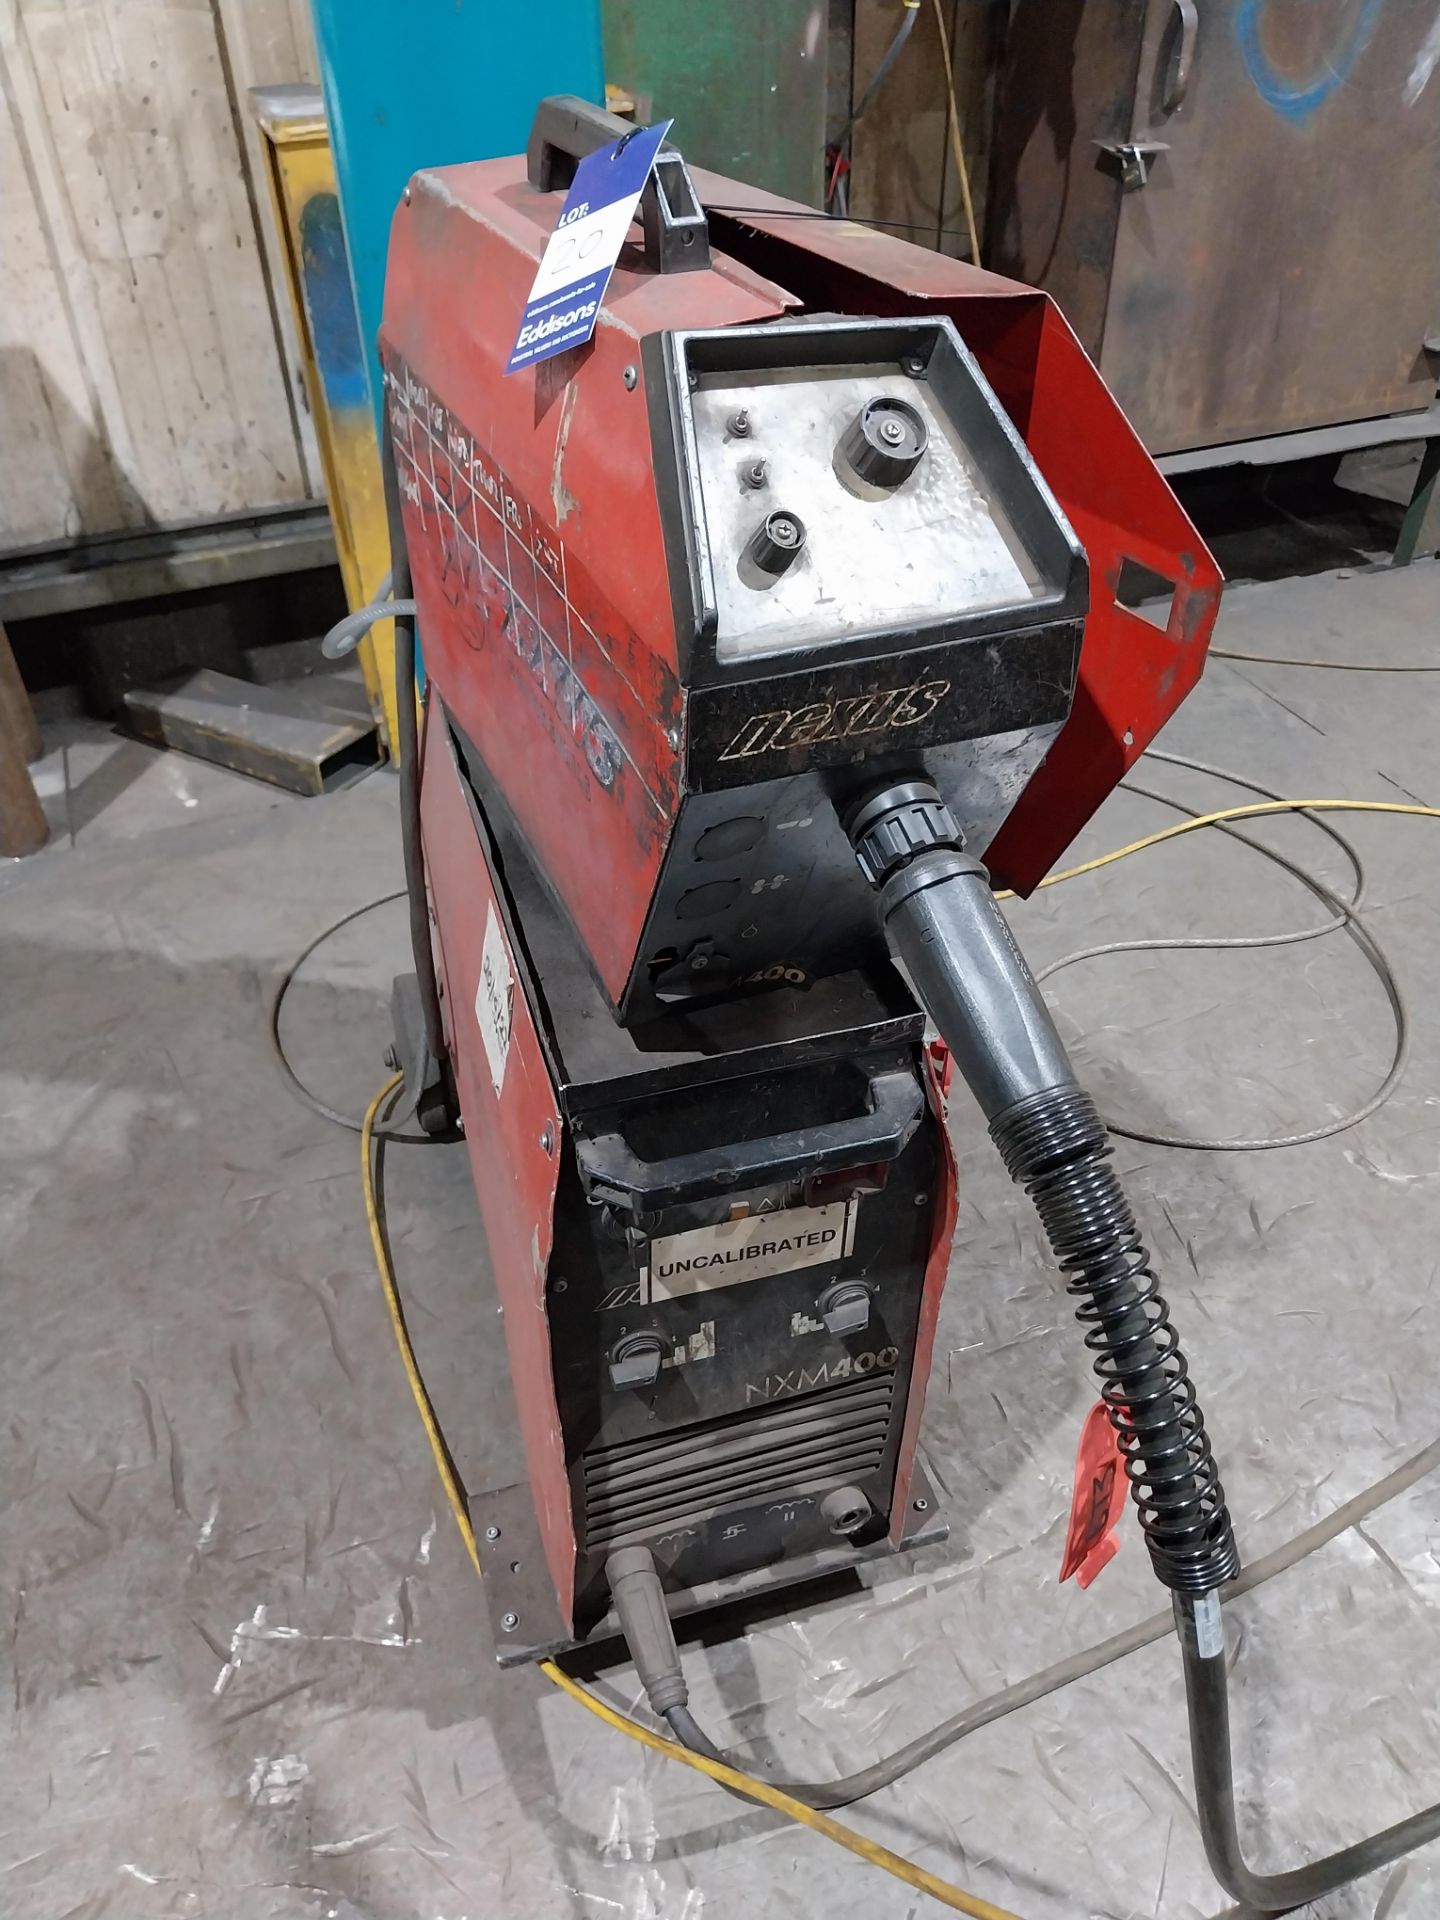 Nexus NXM400 mig welder and wire feed, torch and clamp (bottle not included) - Image 3 of 7